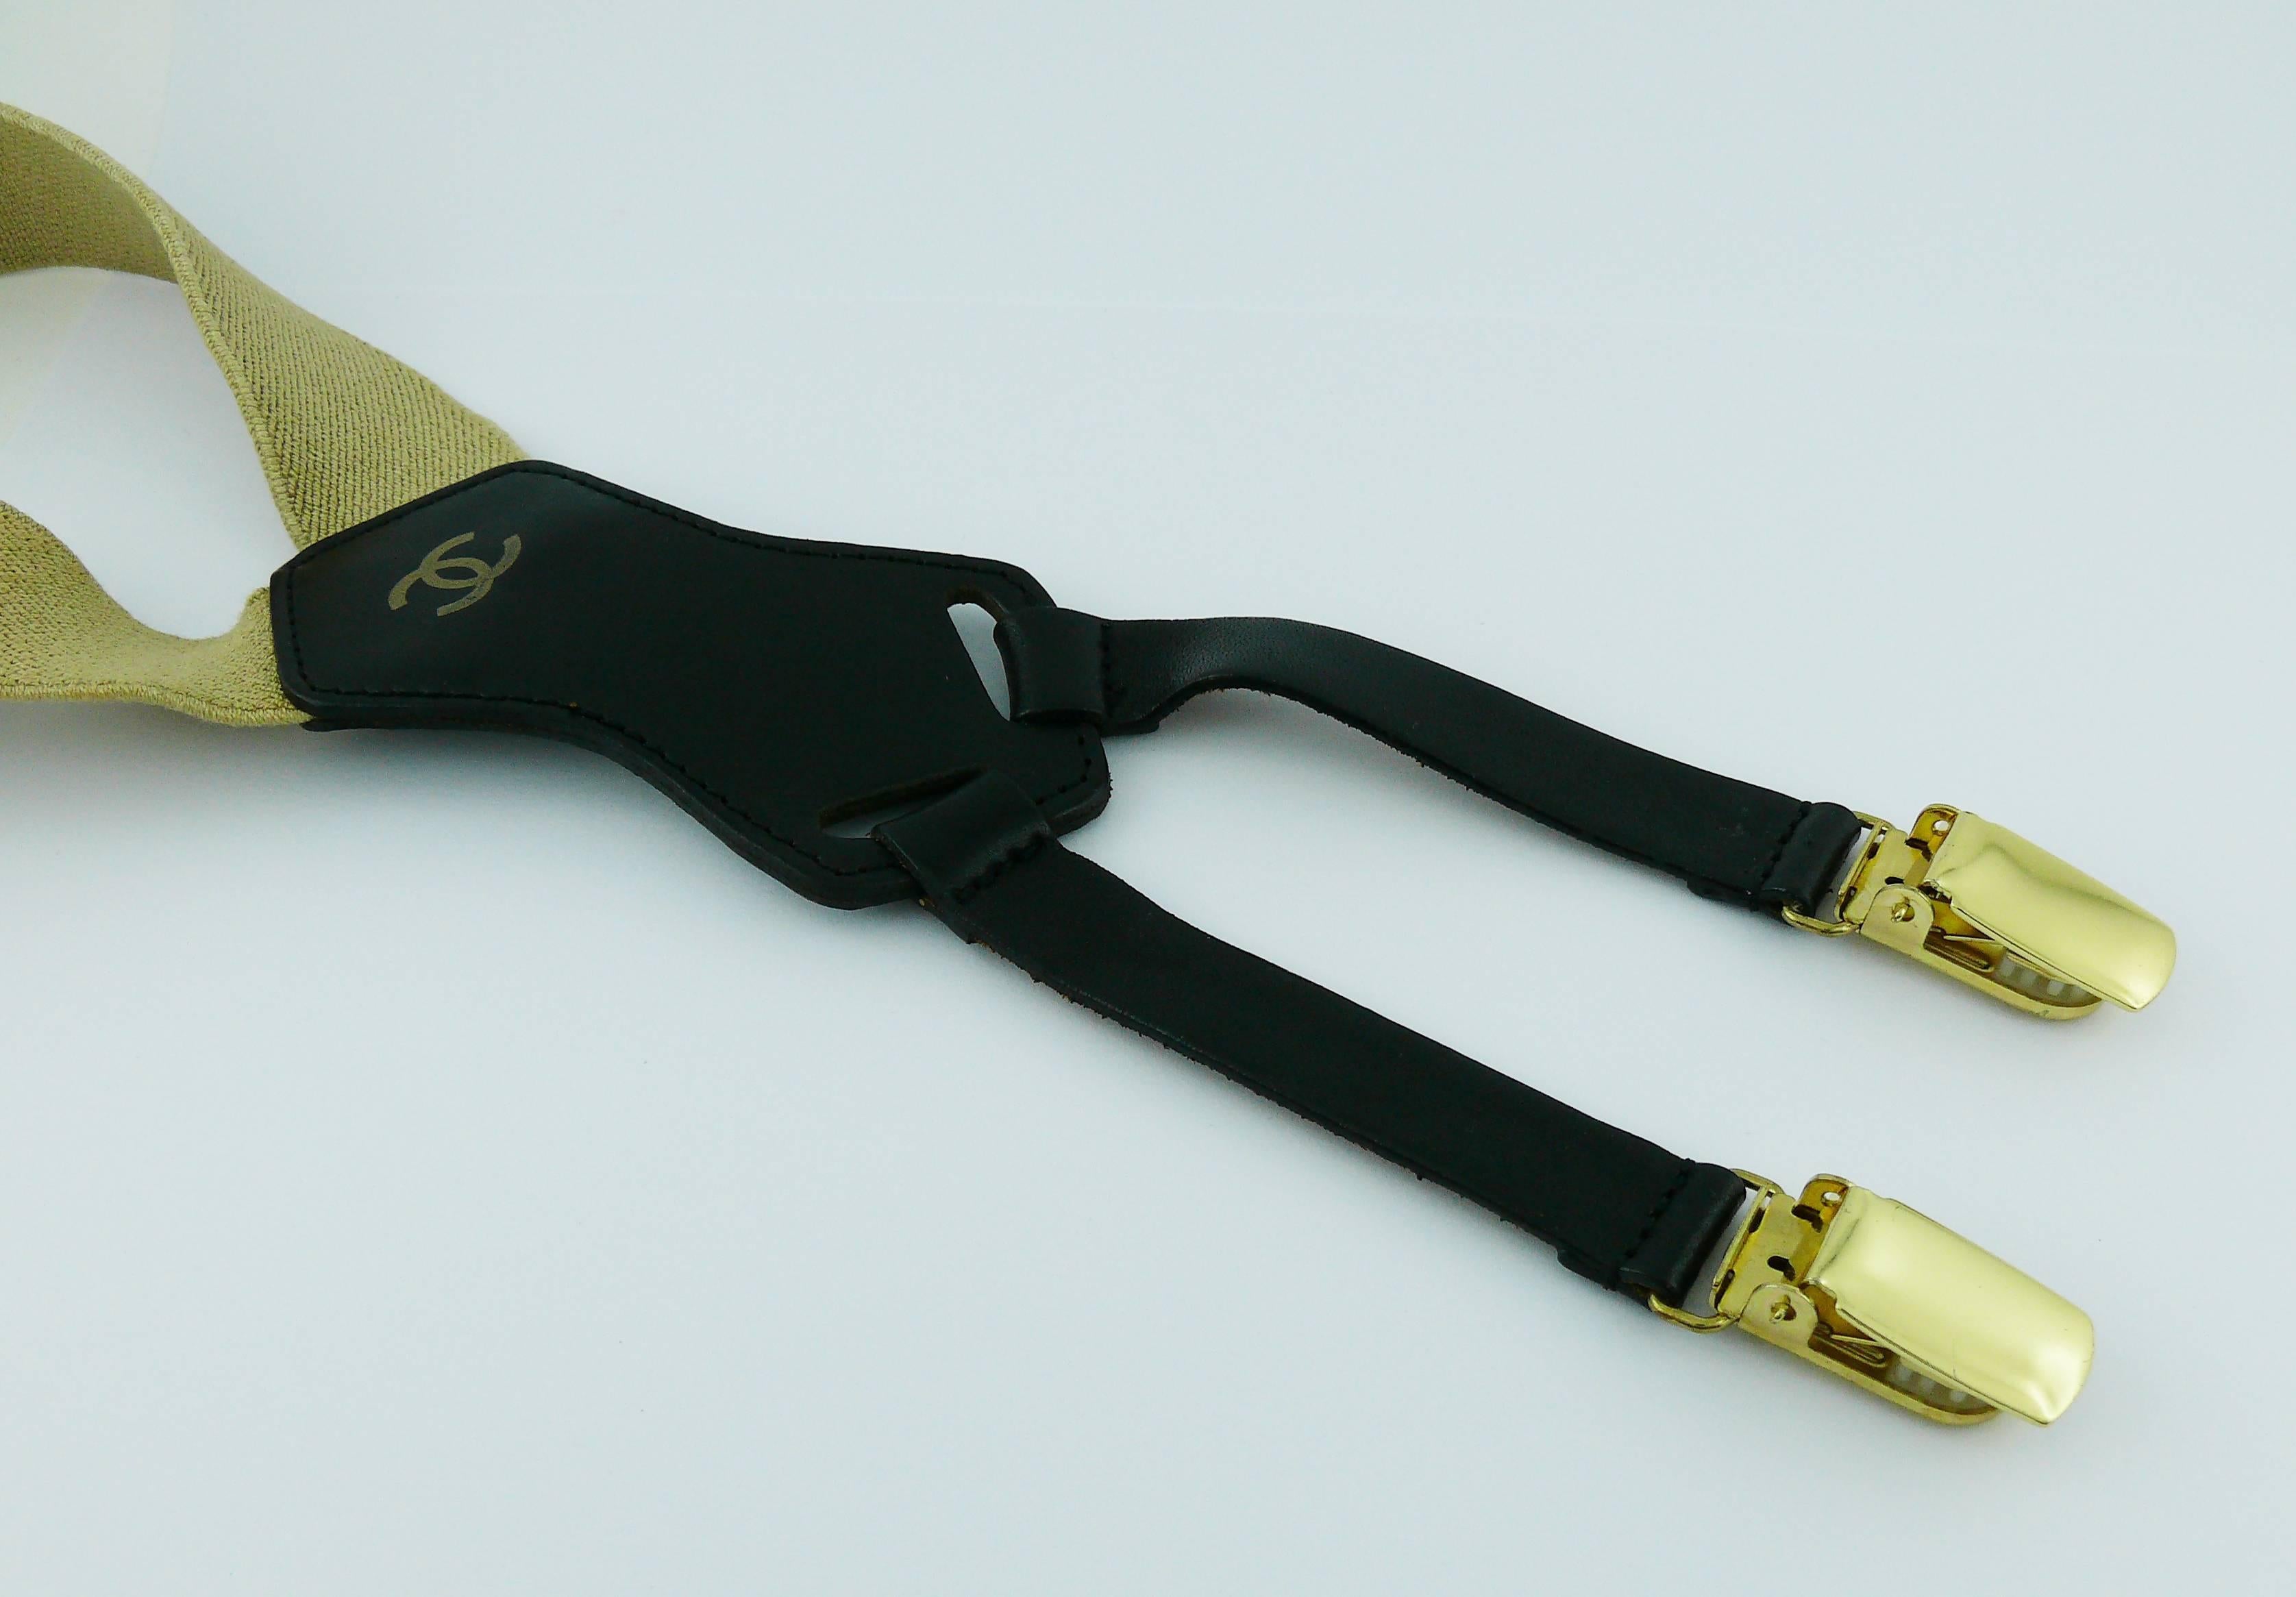 Chanel vintage iconic rare suspenders in light brown version with black printed lettering, gold toned hardware and leather trim.

CC logo printed on the leather.
Label "Fabriqué en France" (Made in France) on the reverse.

These iconic